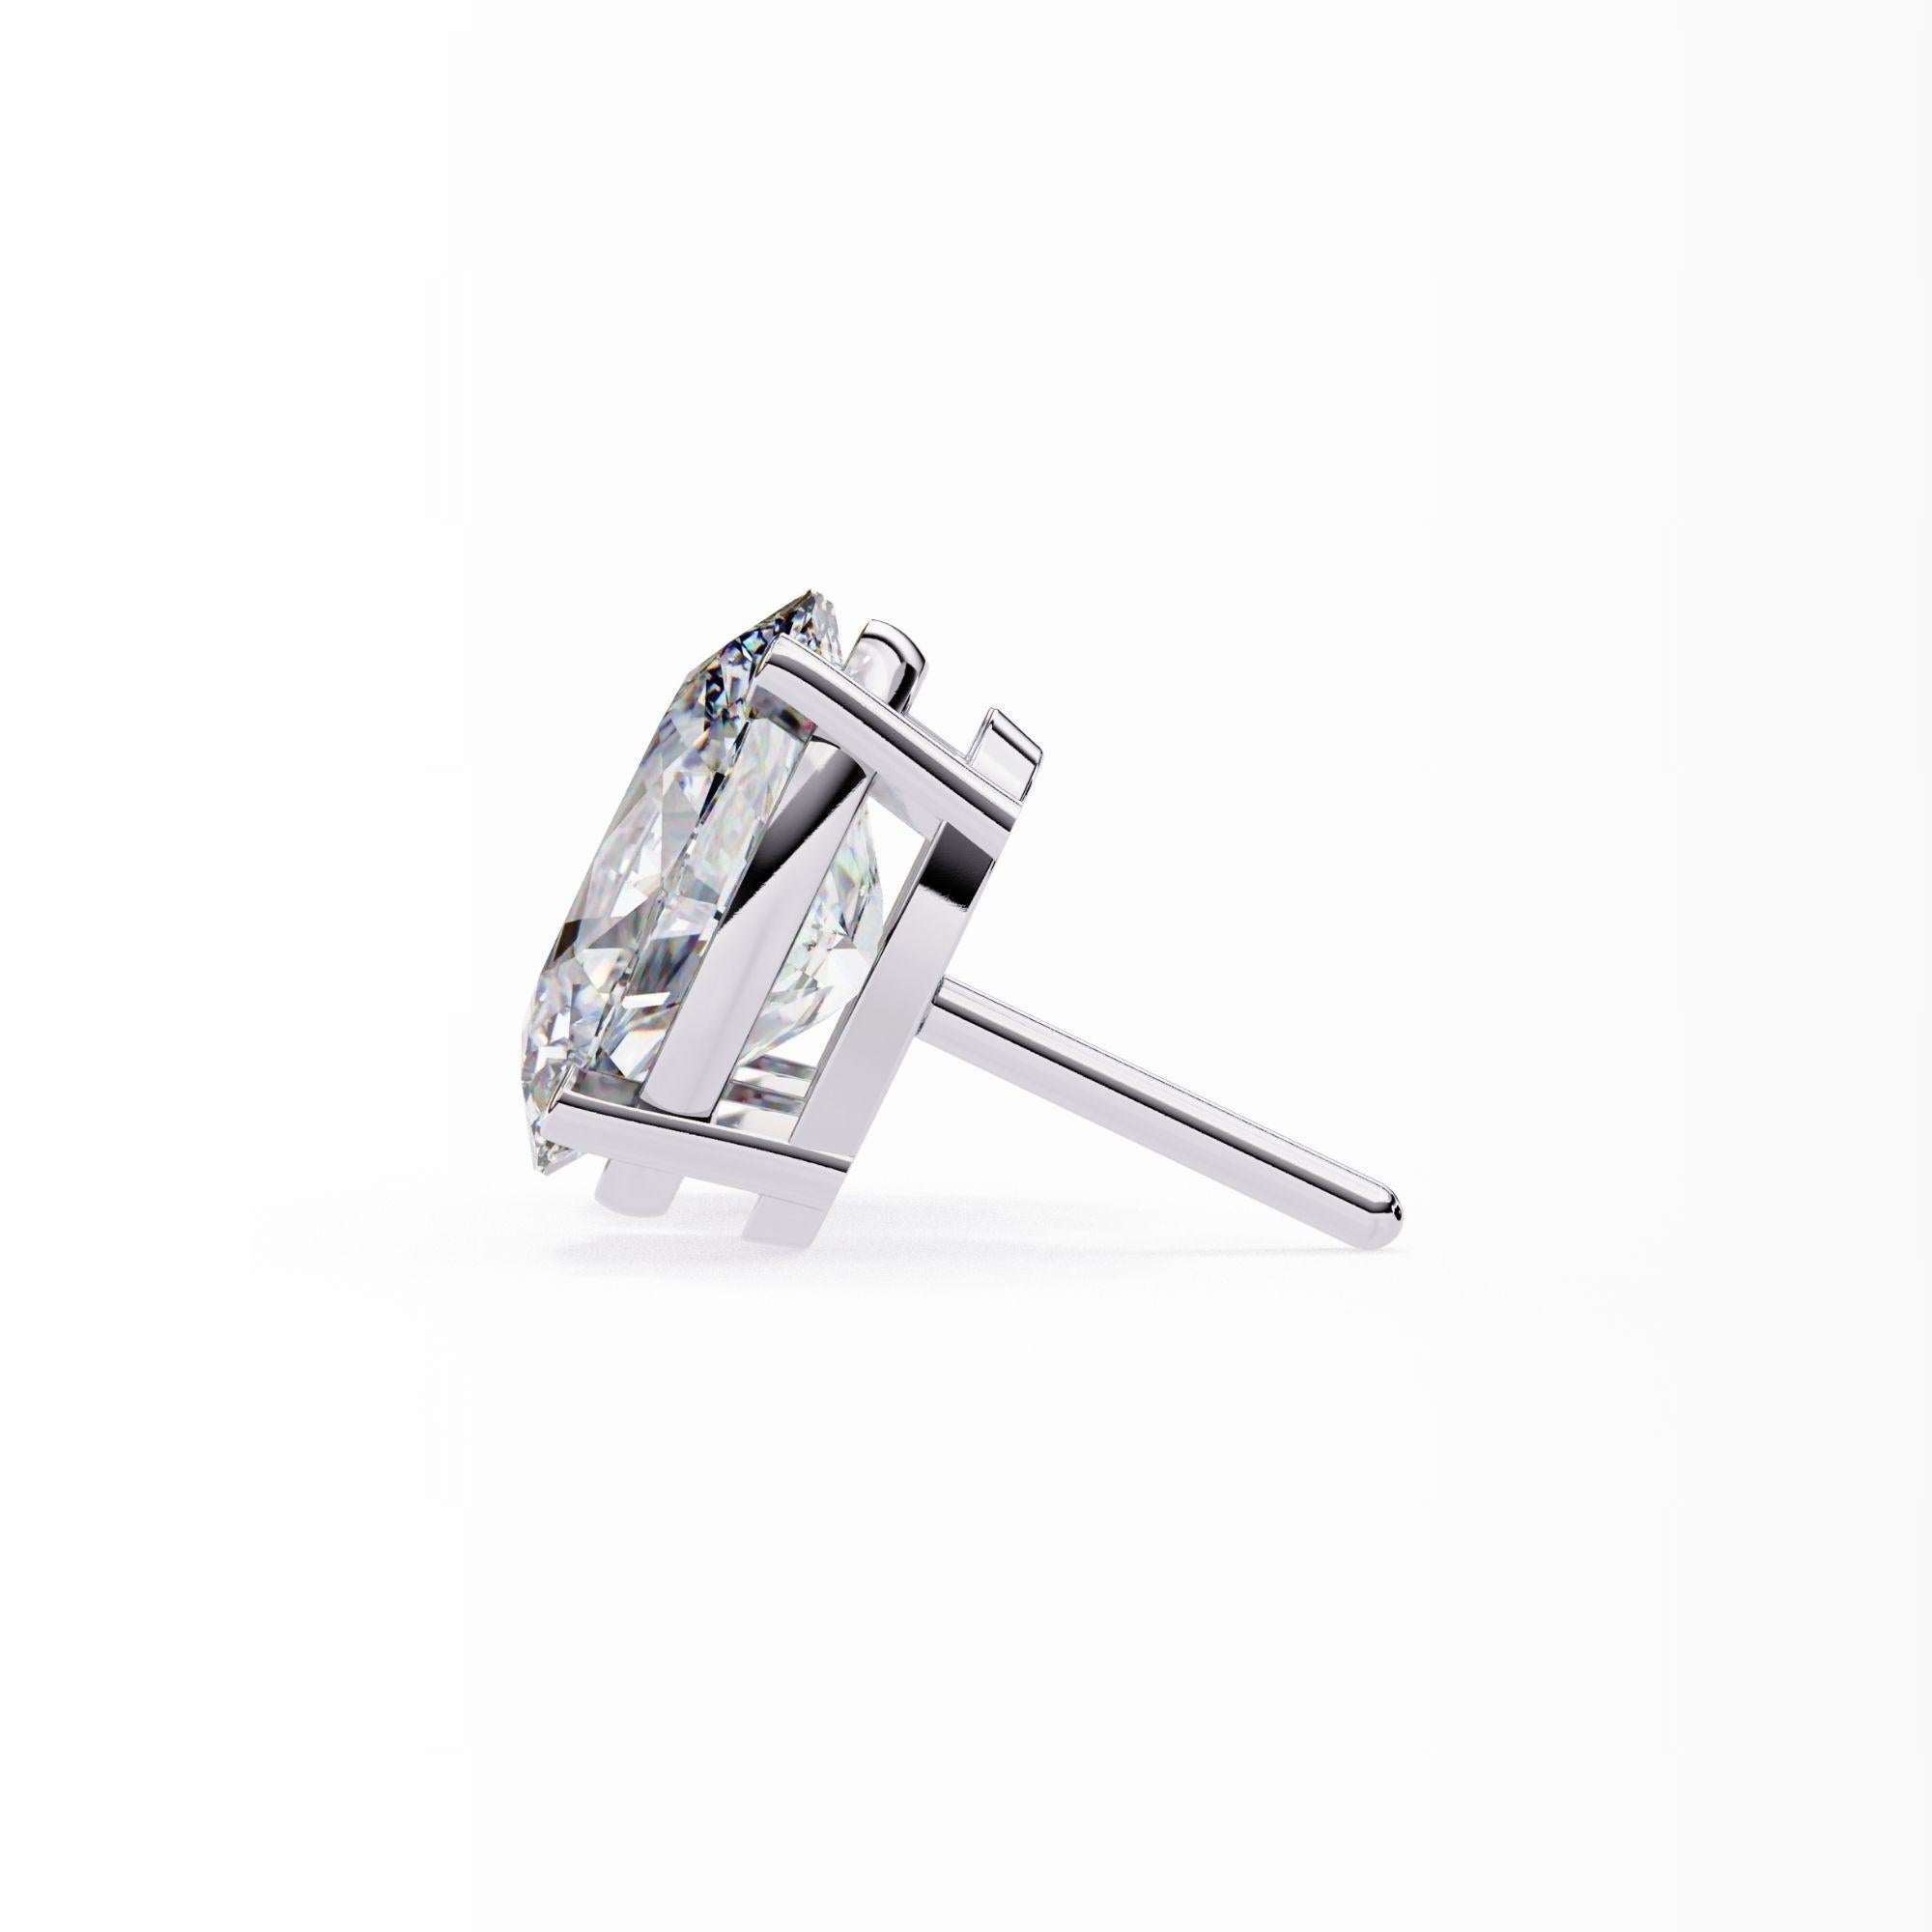 Item Code: AD002
Division: Natural Diamond
Collection: Classics
Metal Type: 14K Gold
Total Diamond Weight: 0.50
Average Diamond Clarity: SI
Average Diamond Colour: GH
Length x Width: 4mm x 3mm
Earring Back: Push Back
Setting Type: Prongs
Related